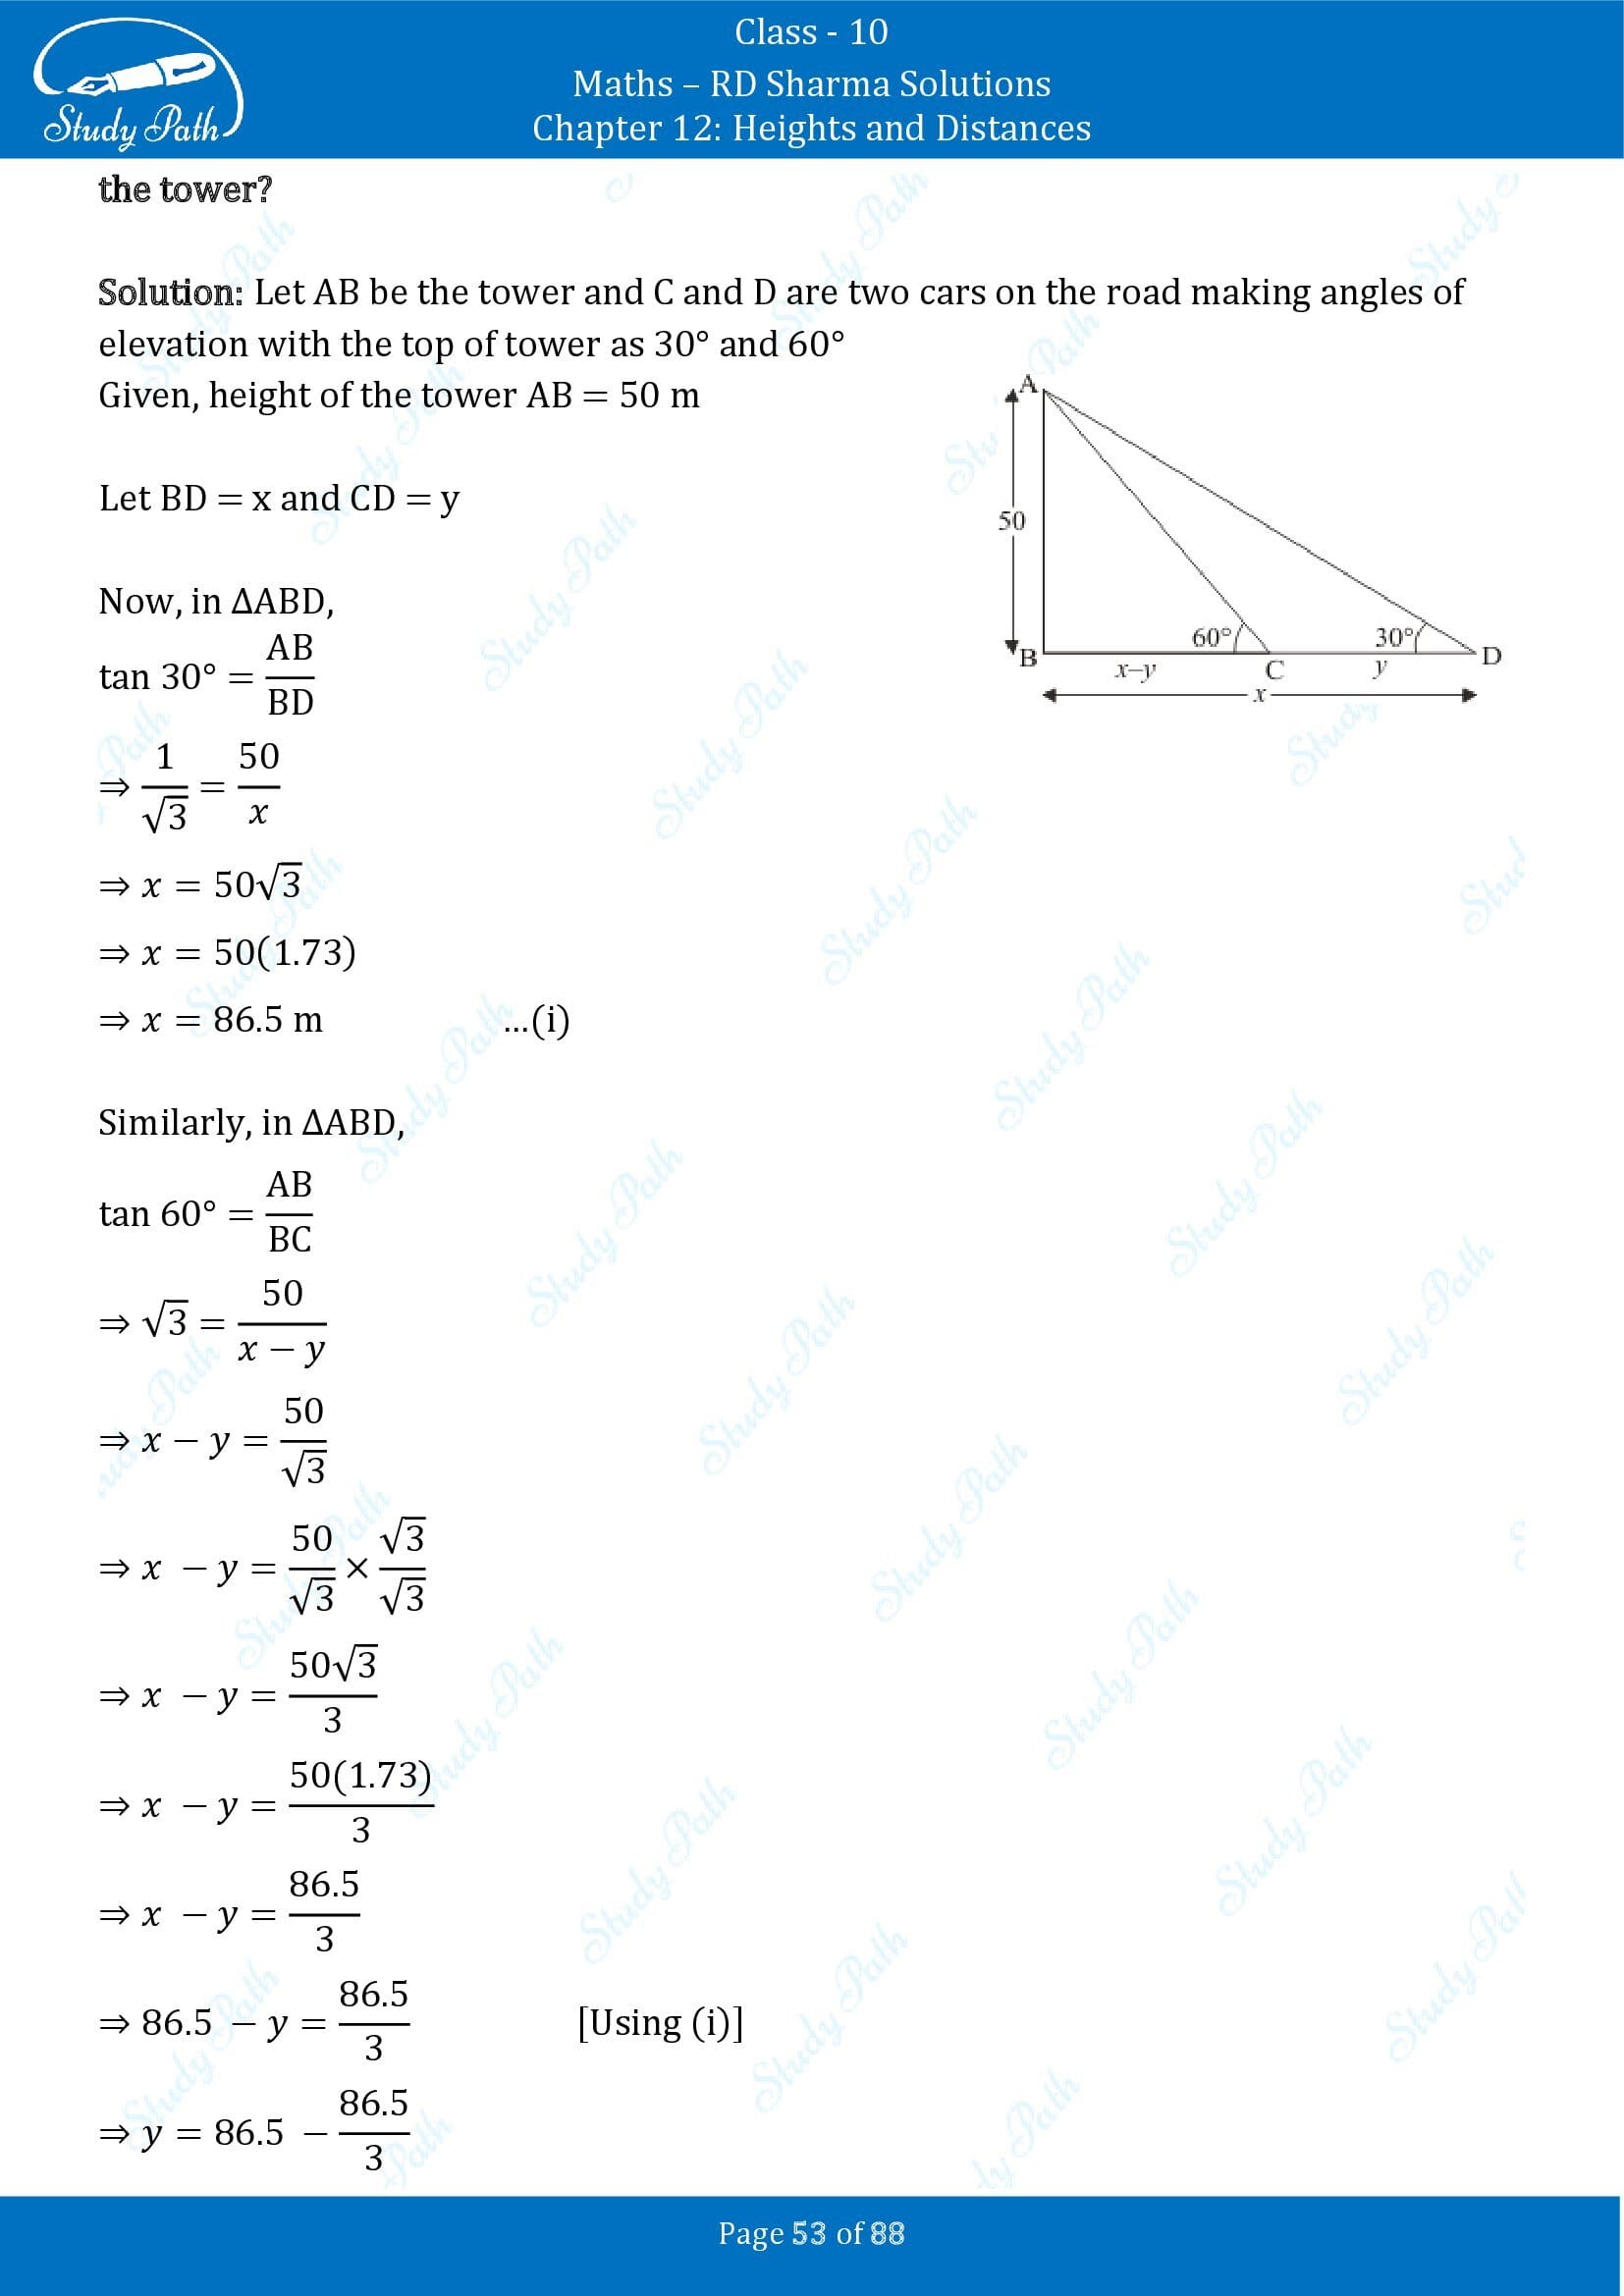 RD Sharma Solutions Class 10 Chapter 12 Heights and Distances Exercise 12.1 00053